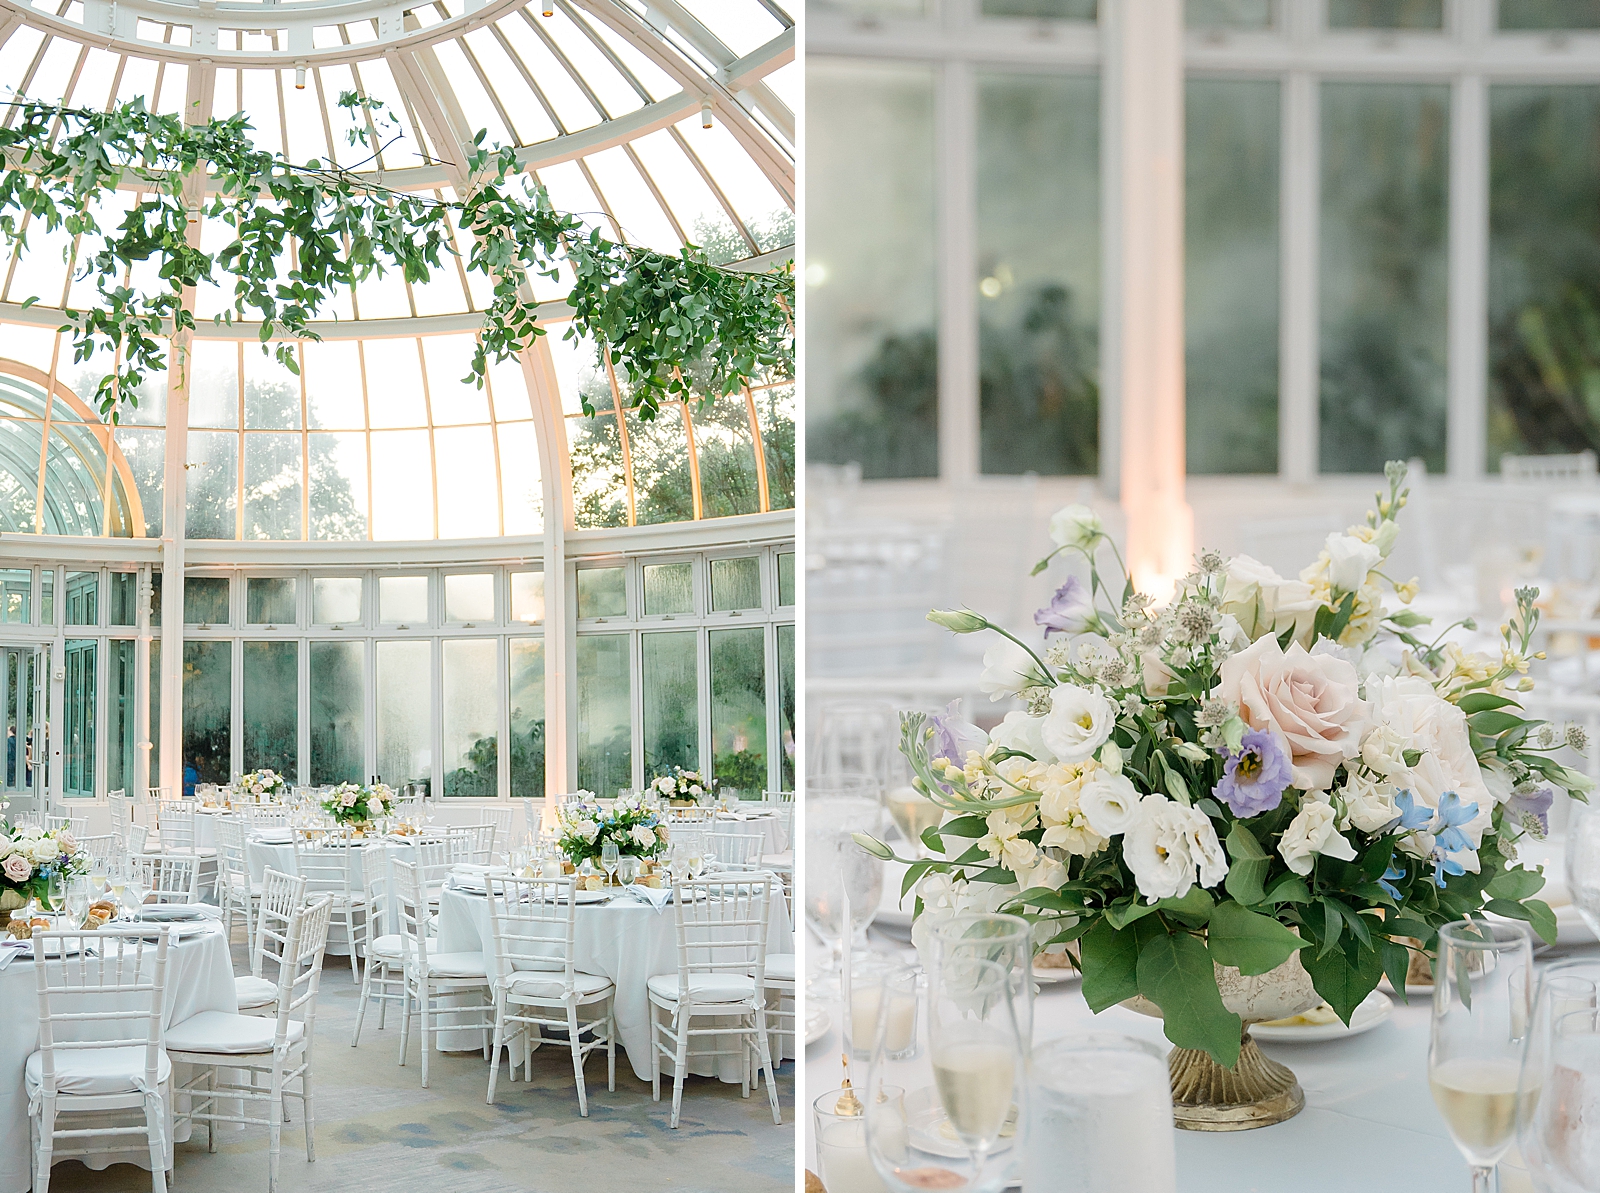 Left photo: Shot of the reception space- a dome shaped sunroom with white table linens and chairs. 
Right photo: Up close shot of centerpiece bouquet on a table. 